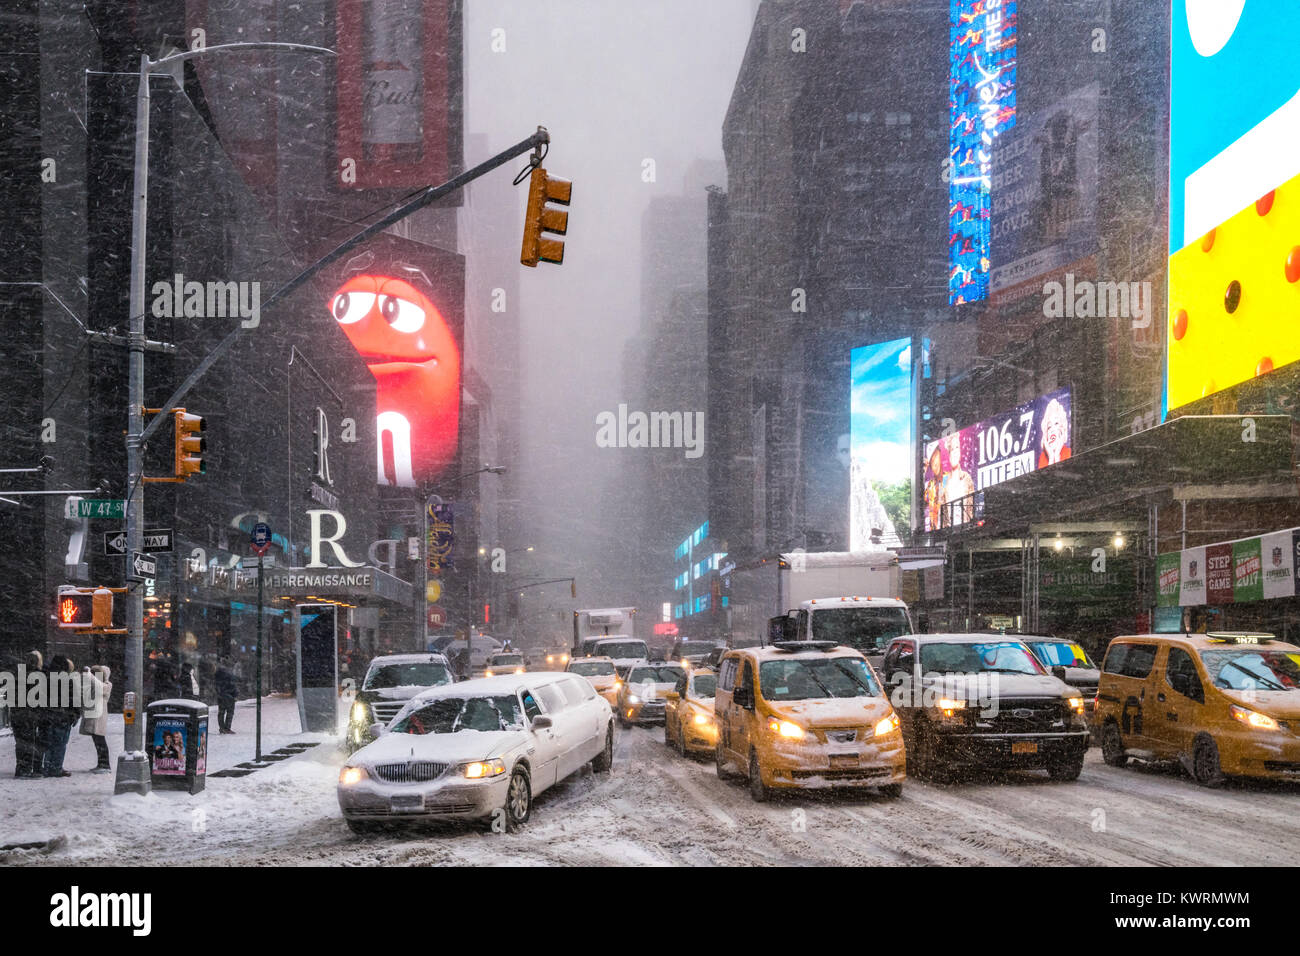 New York, USA. 4th Jan, 2018. Traffic was slow and difficult during a heavy snowstorm which meteorologists called 'bombogenesis' or 'bomb cyclone' that brought record snow, bitter cold and strong winds over New York on January 4, 2018. Credit: Enrique Shore/Alamy Live News Stock Photo